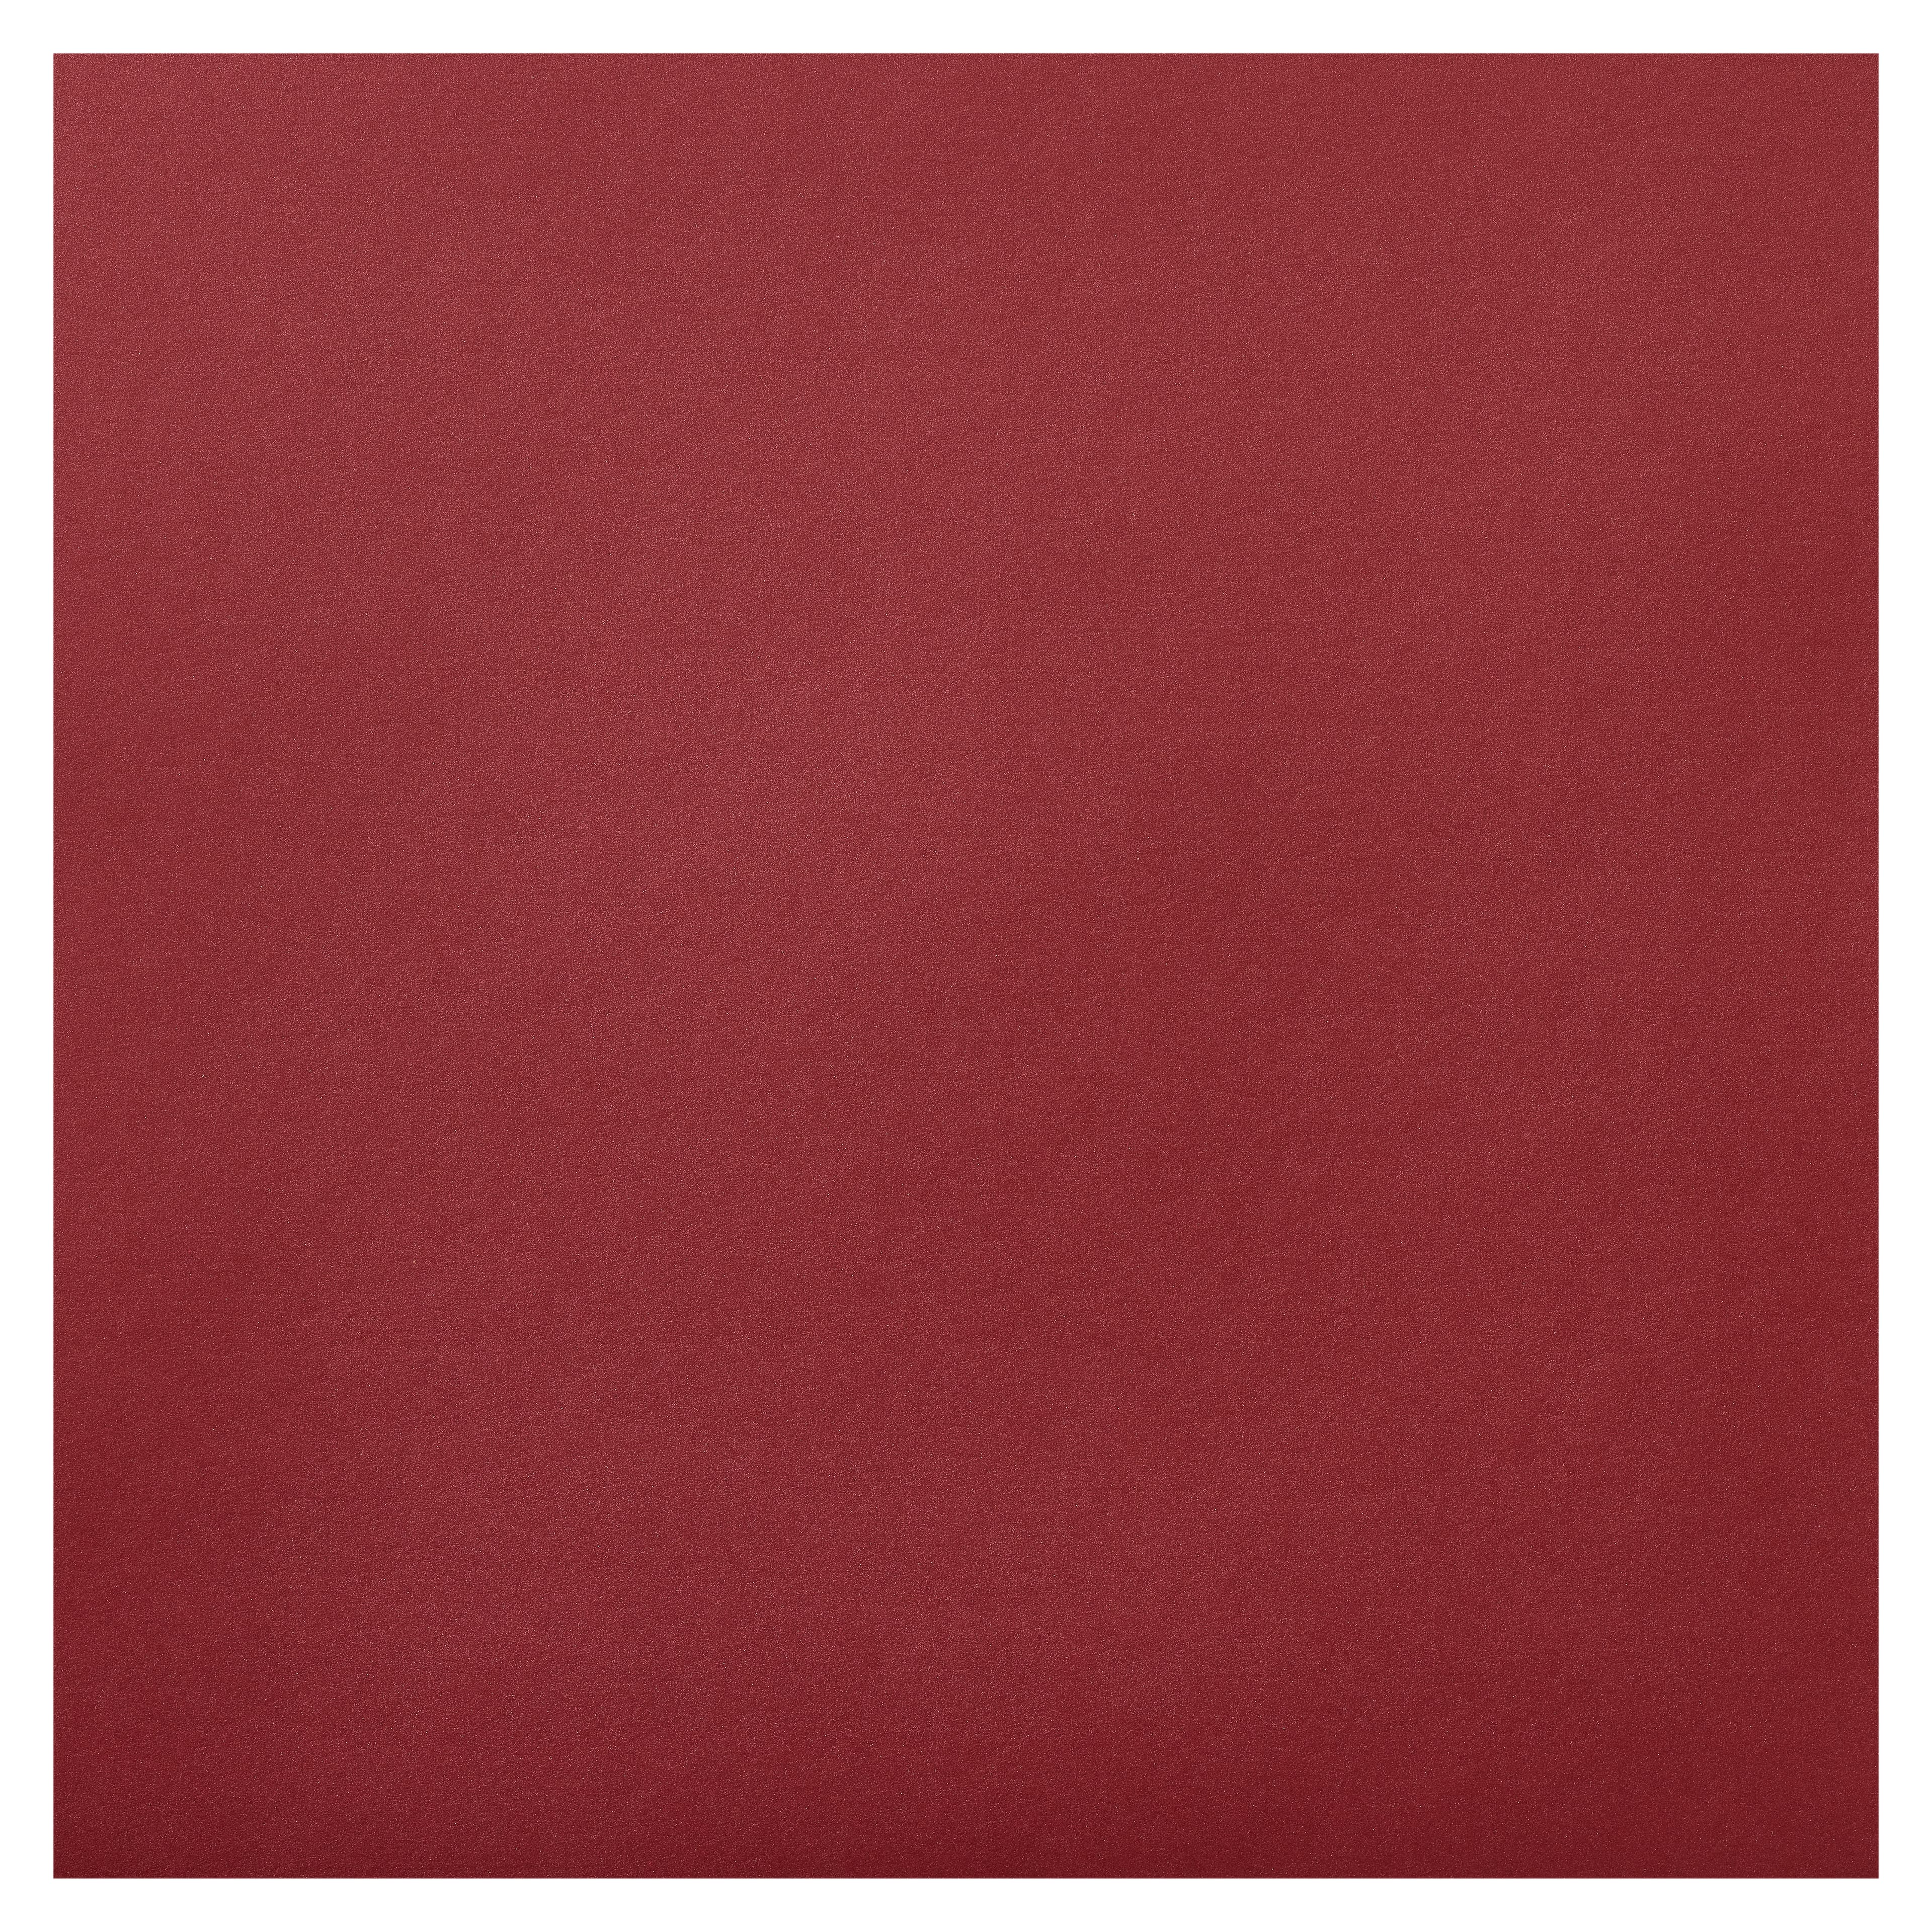 Red 8-1/2-x-11 BASIS Paper, 100 per package, 216 GSM (80lb Cover)